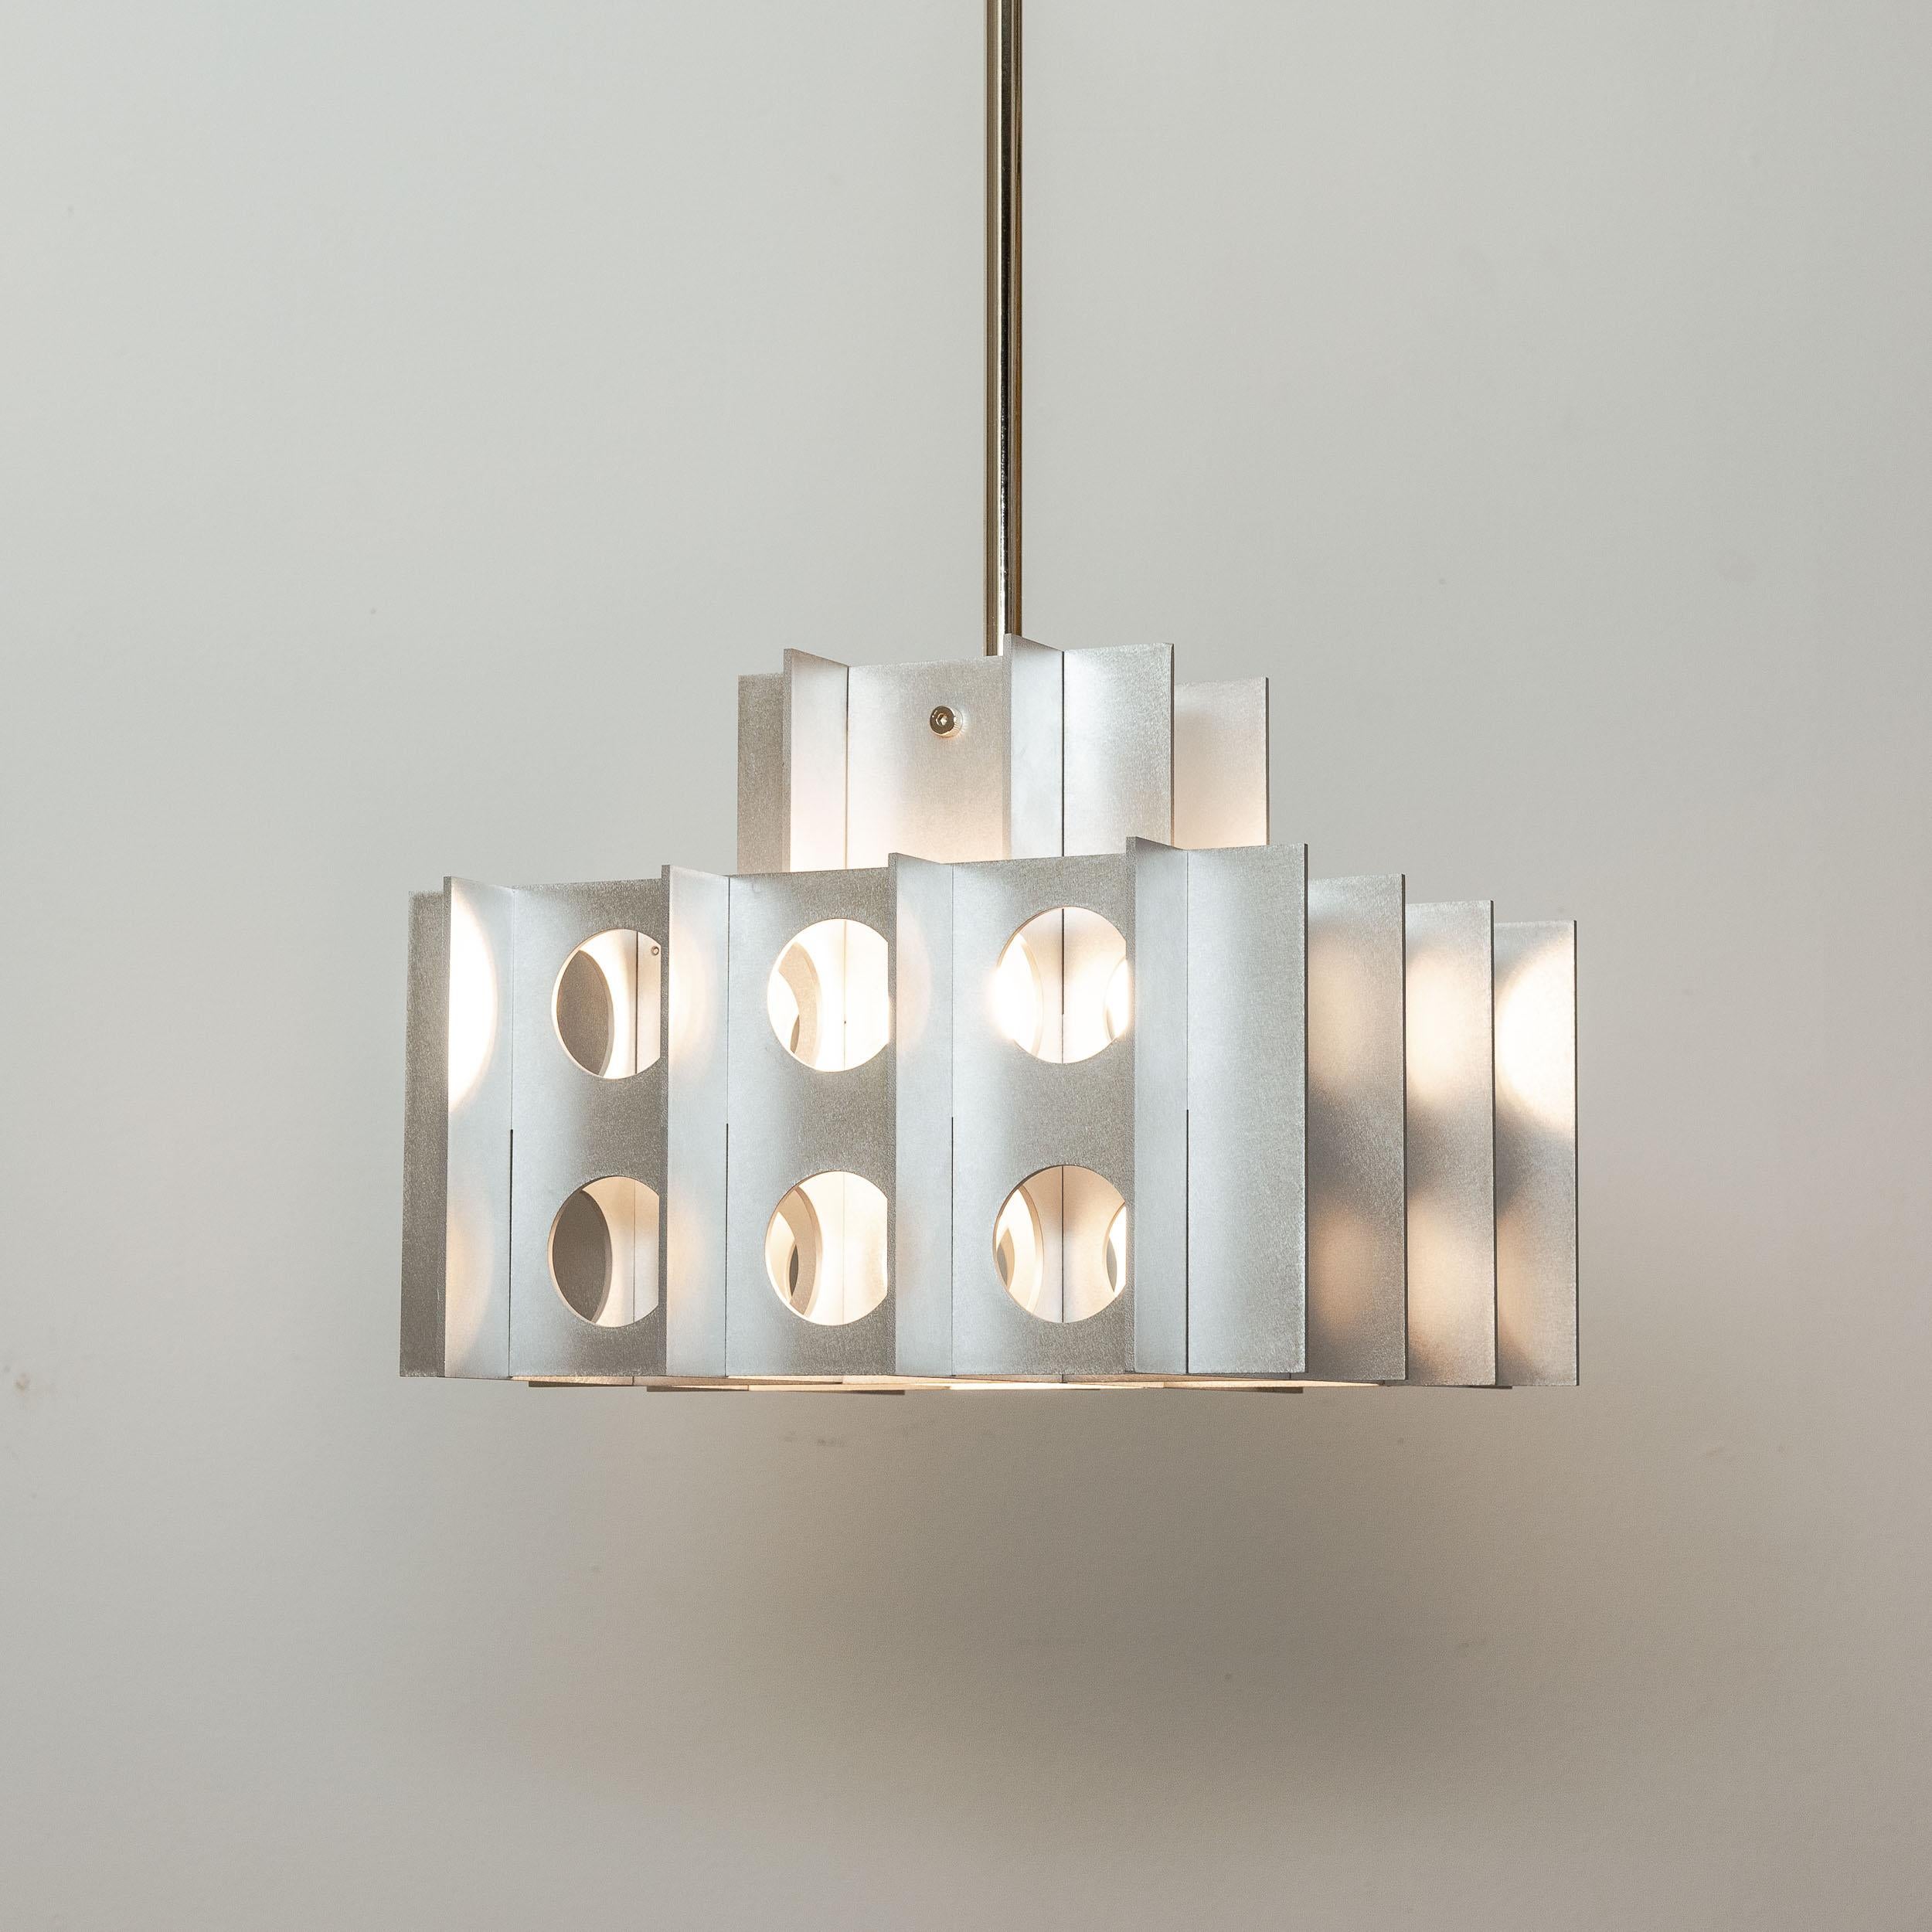 TENFOLD PENDANT 3TA 18inch by Luft Tanaka Studio

Composed of interlocking sheet metal panels, the Tenfold Series is inspired by brutalism and the 1970's architectural style. The light fixture works well as a single fixture over a dining table